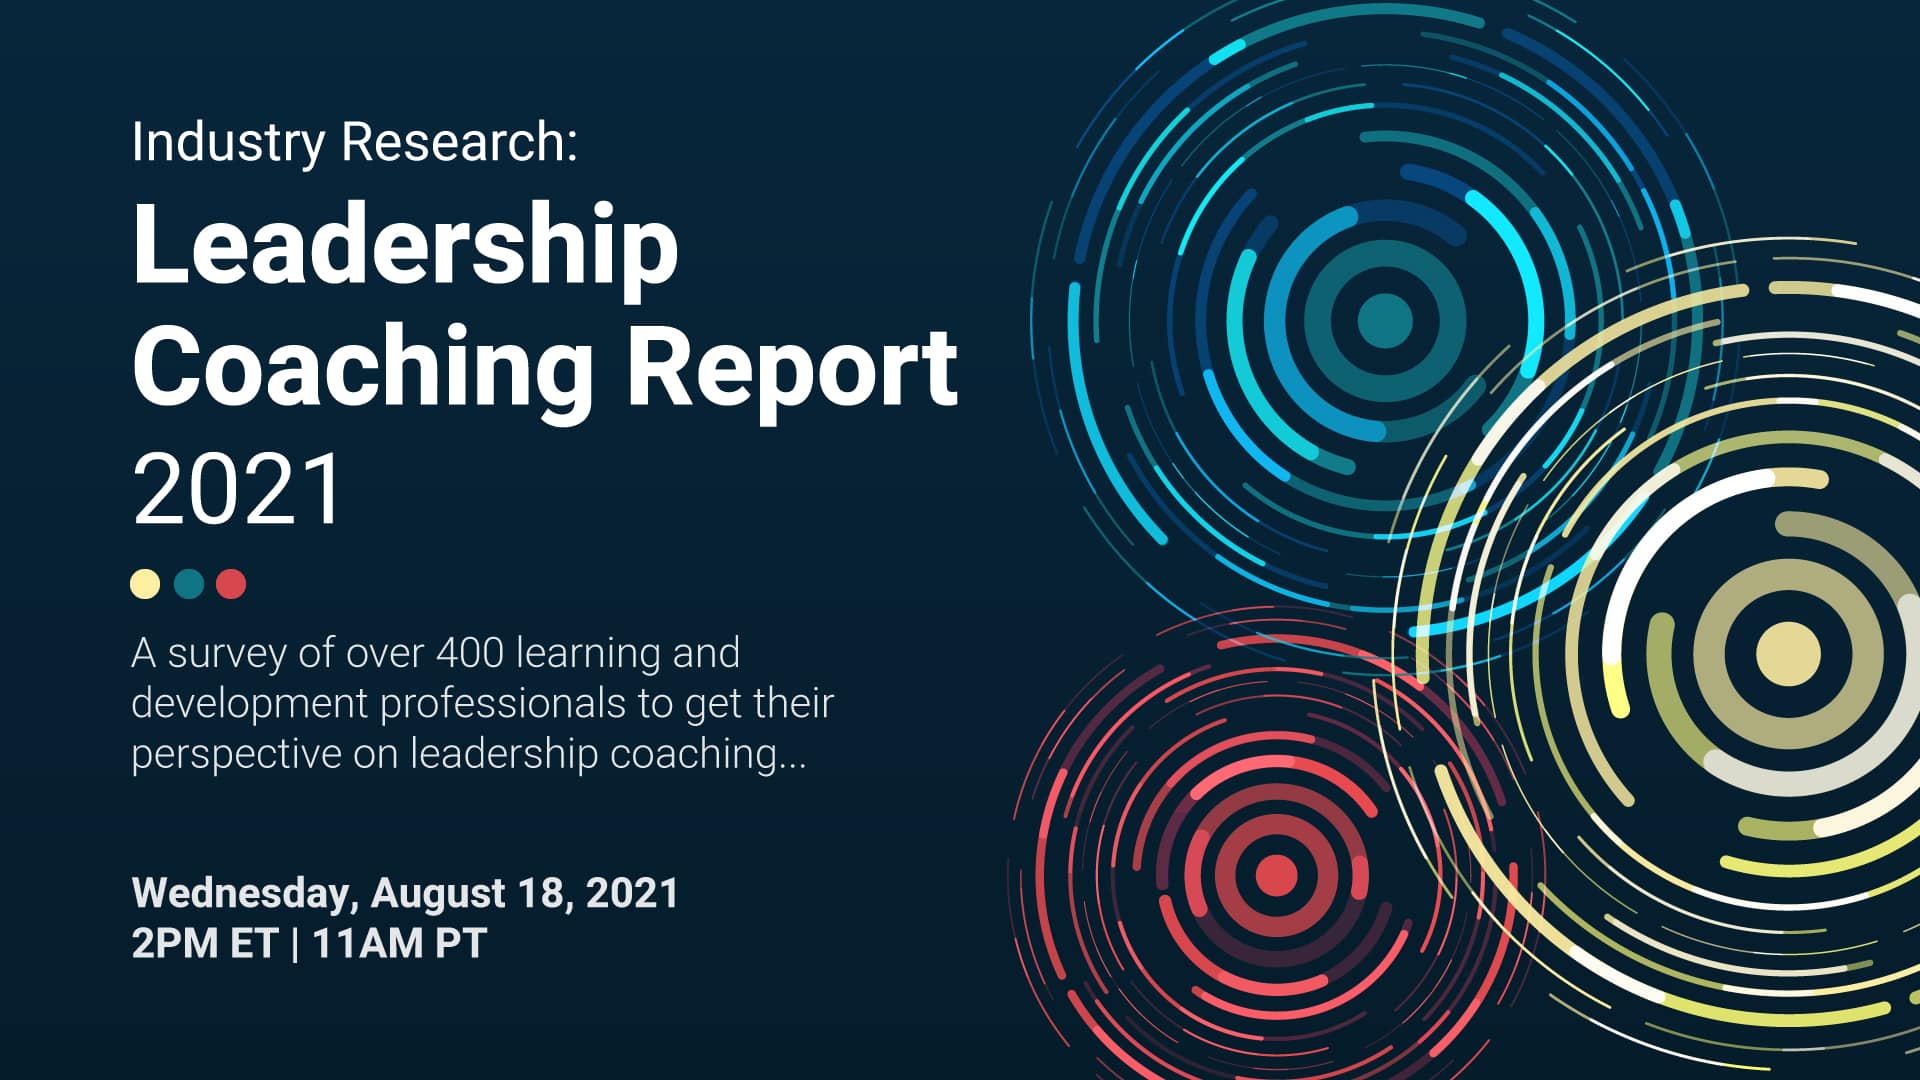 Industry Research: Leadership Coaching Report 2021